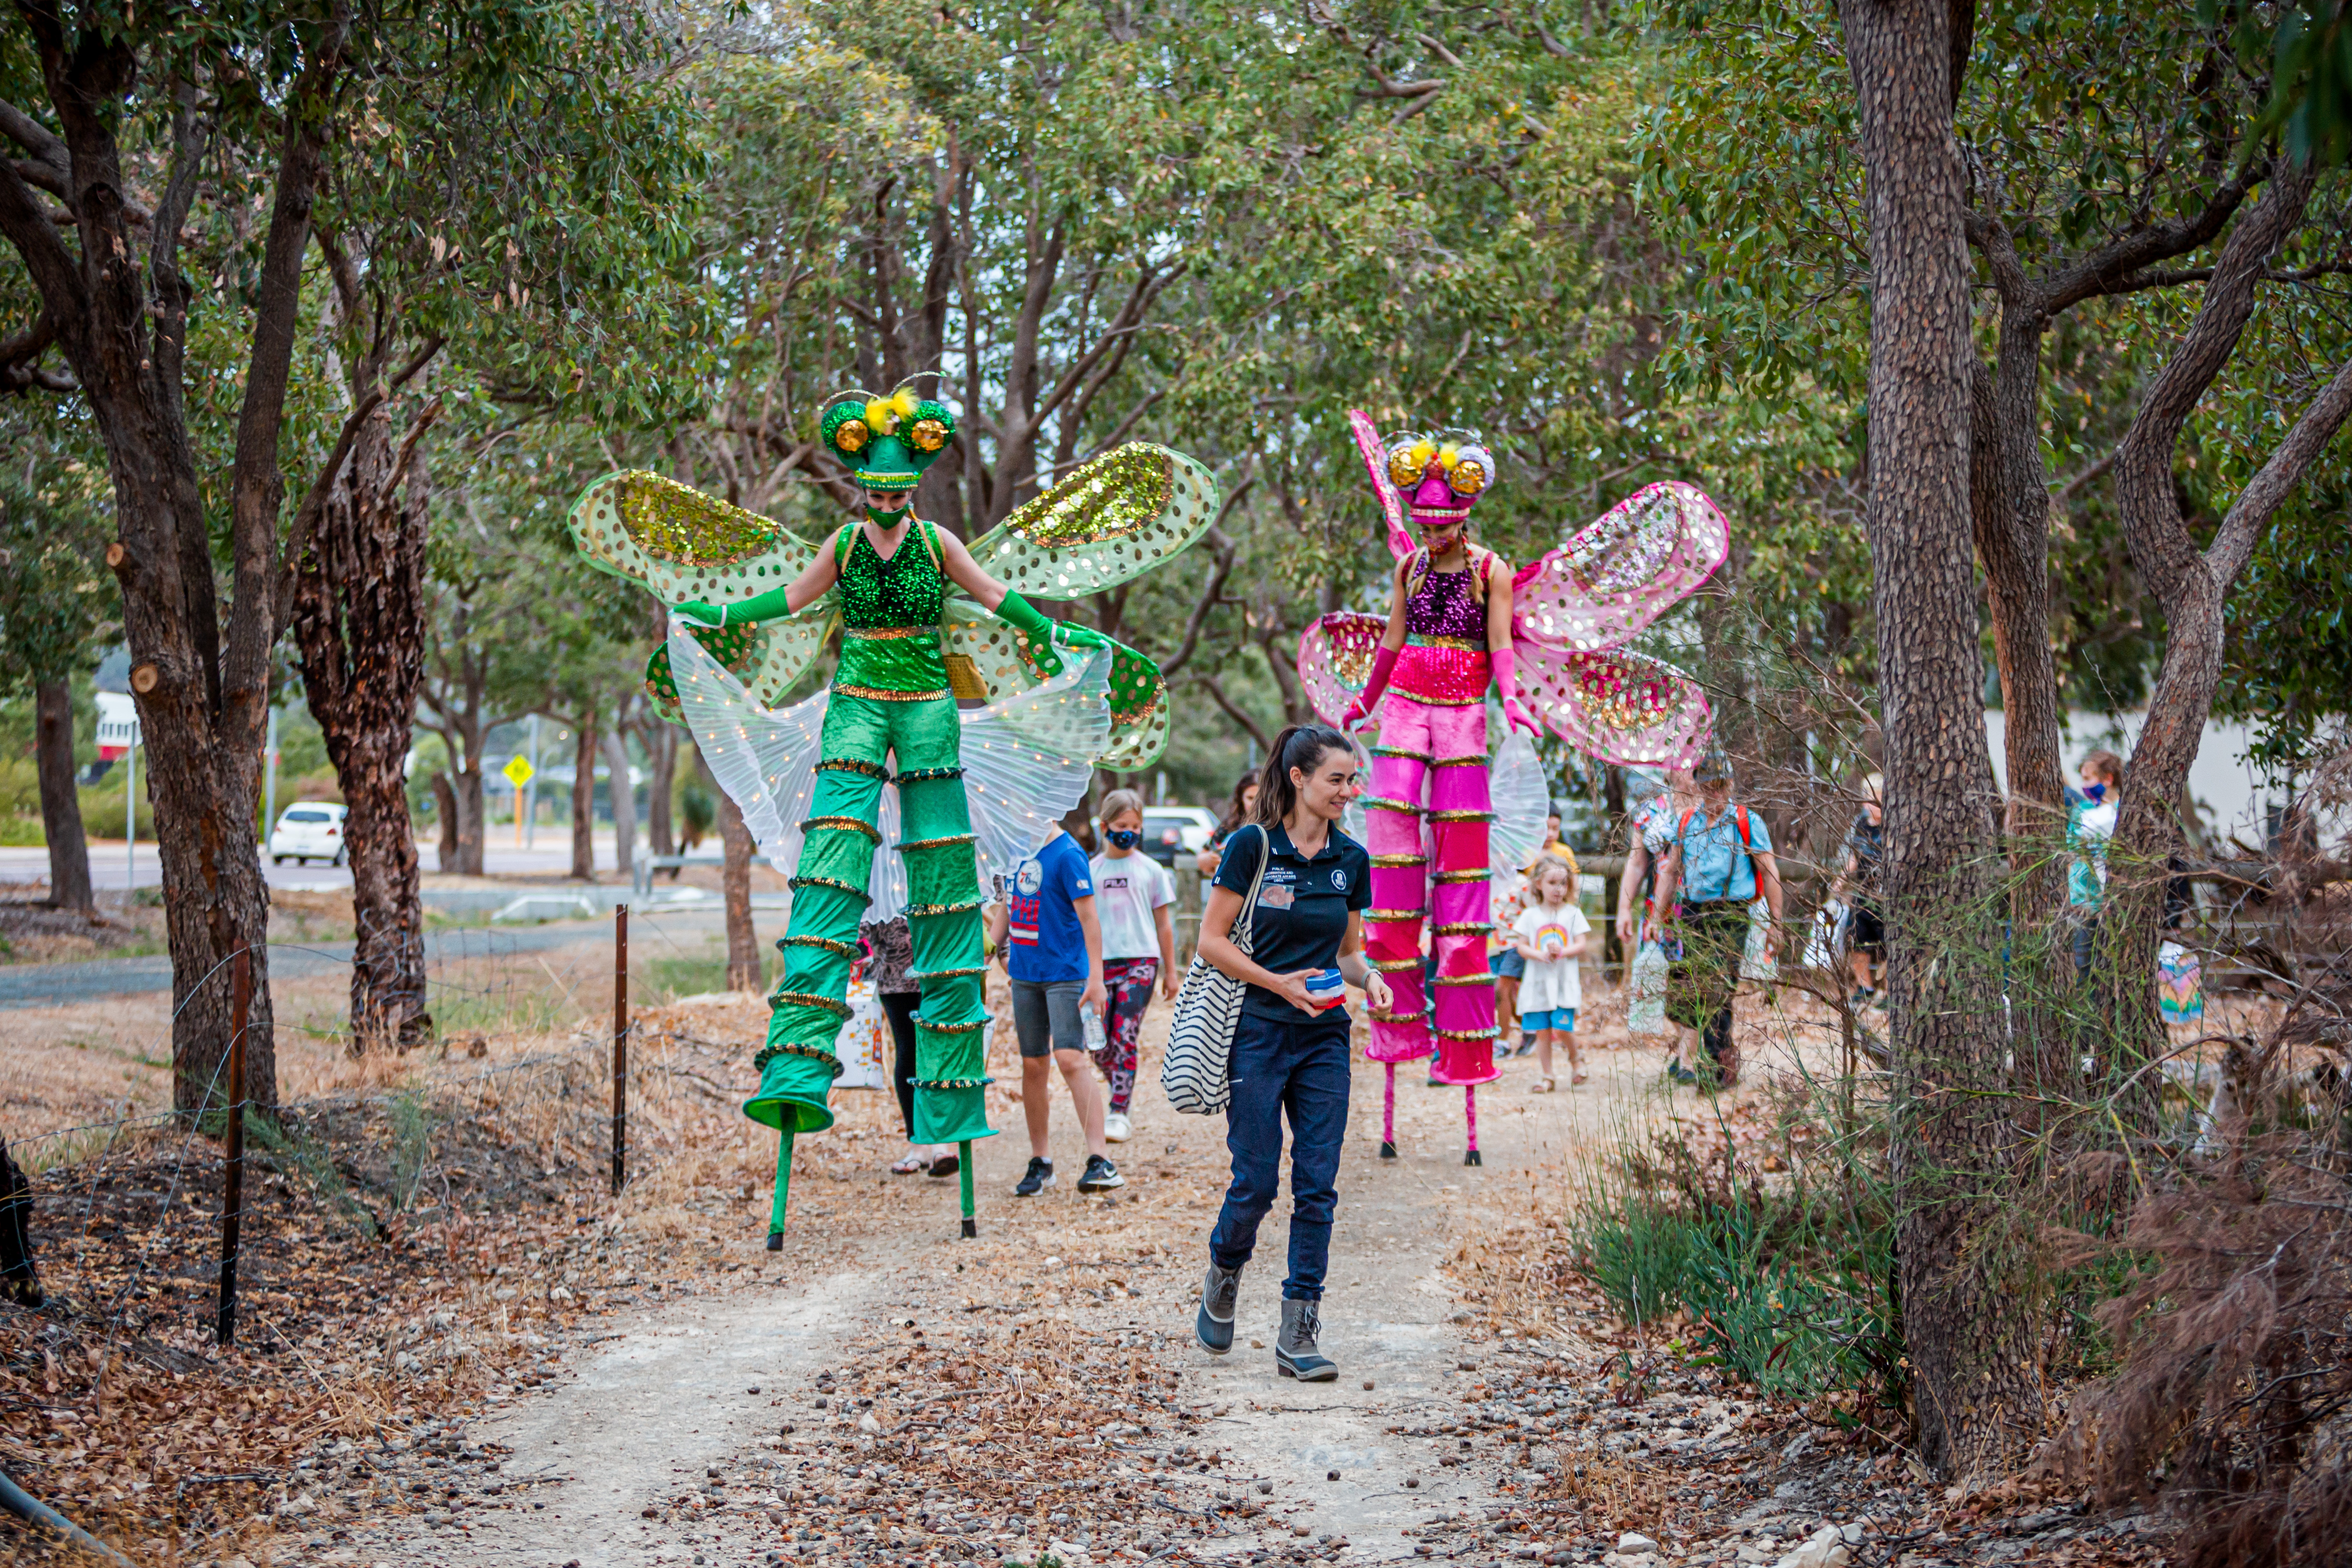 children and adults walk along a trail through the bush lead by two decorated stilt walkers